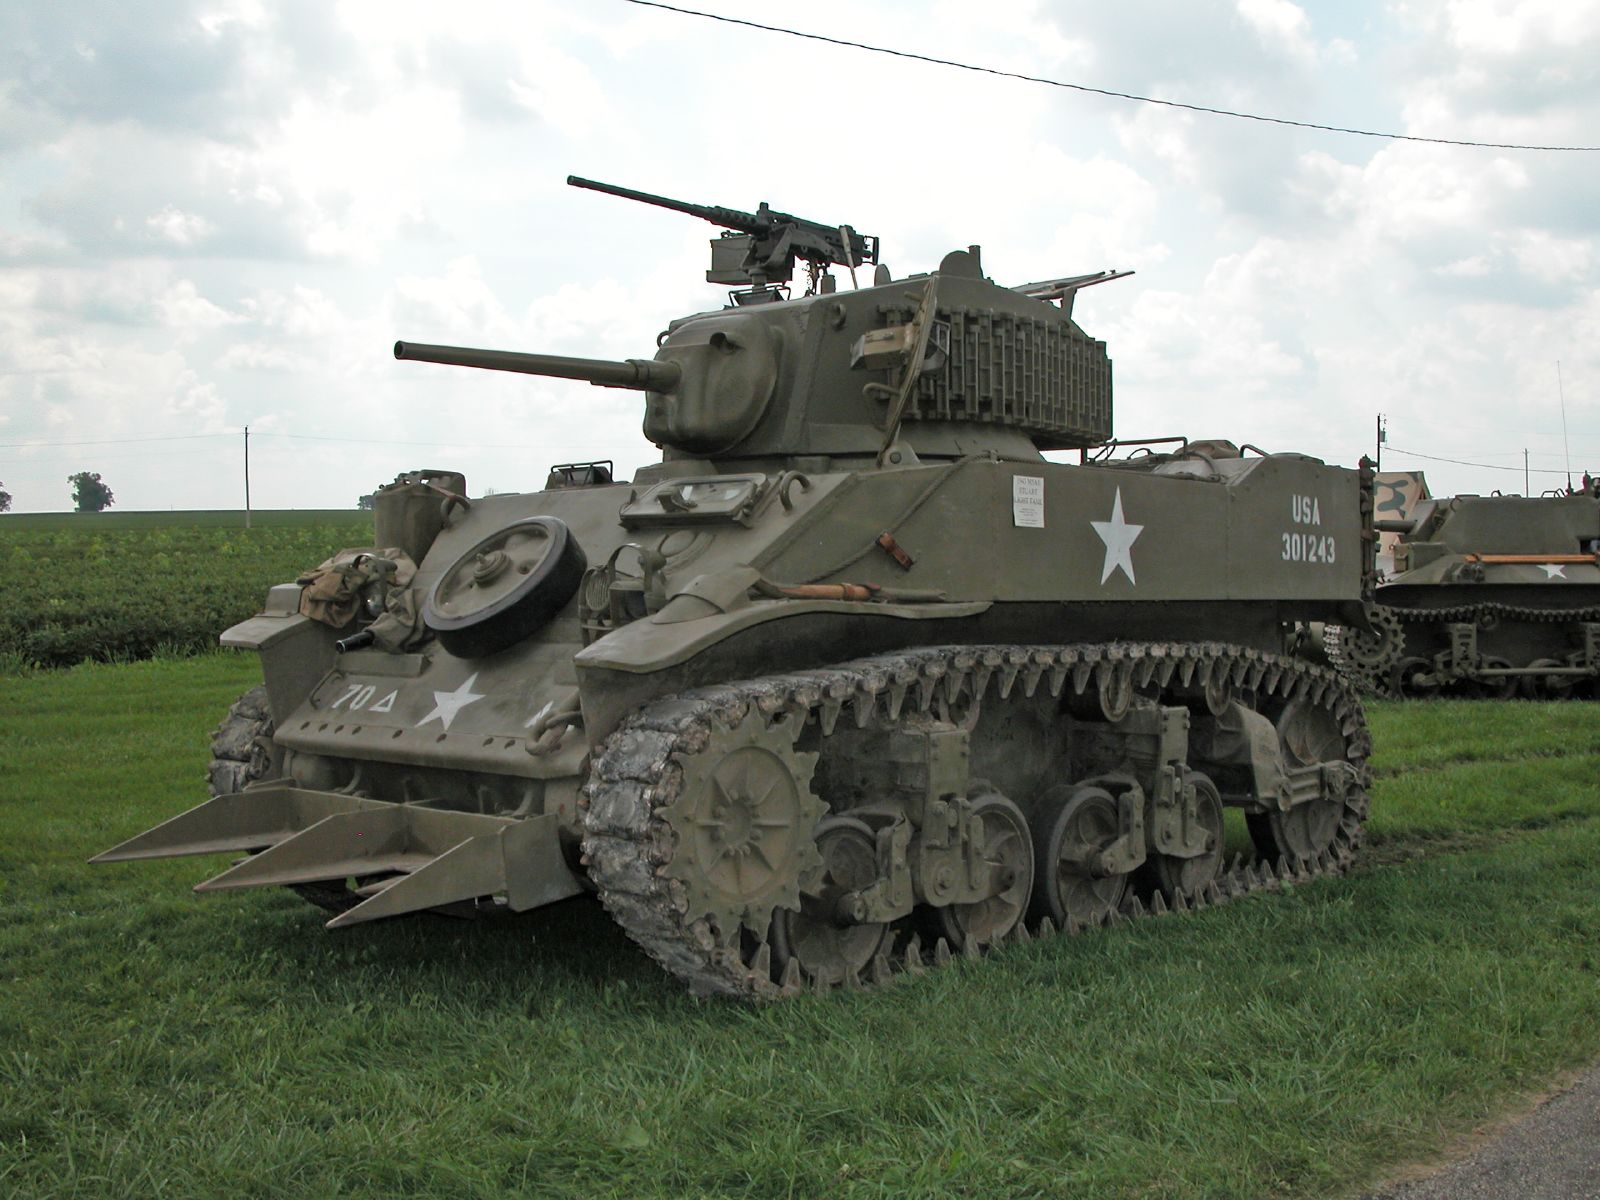 a tank in grassy field next to some other tanks